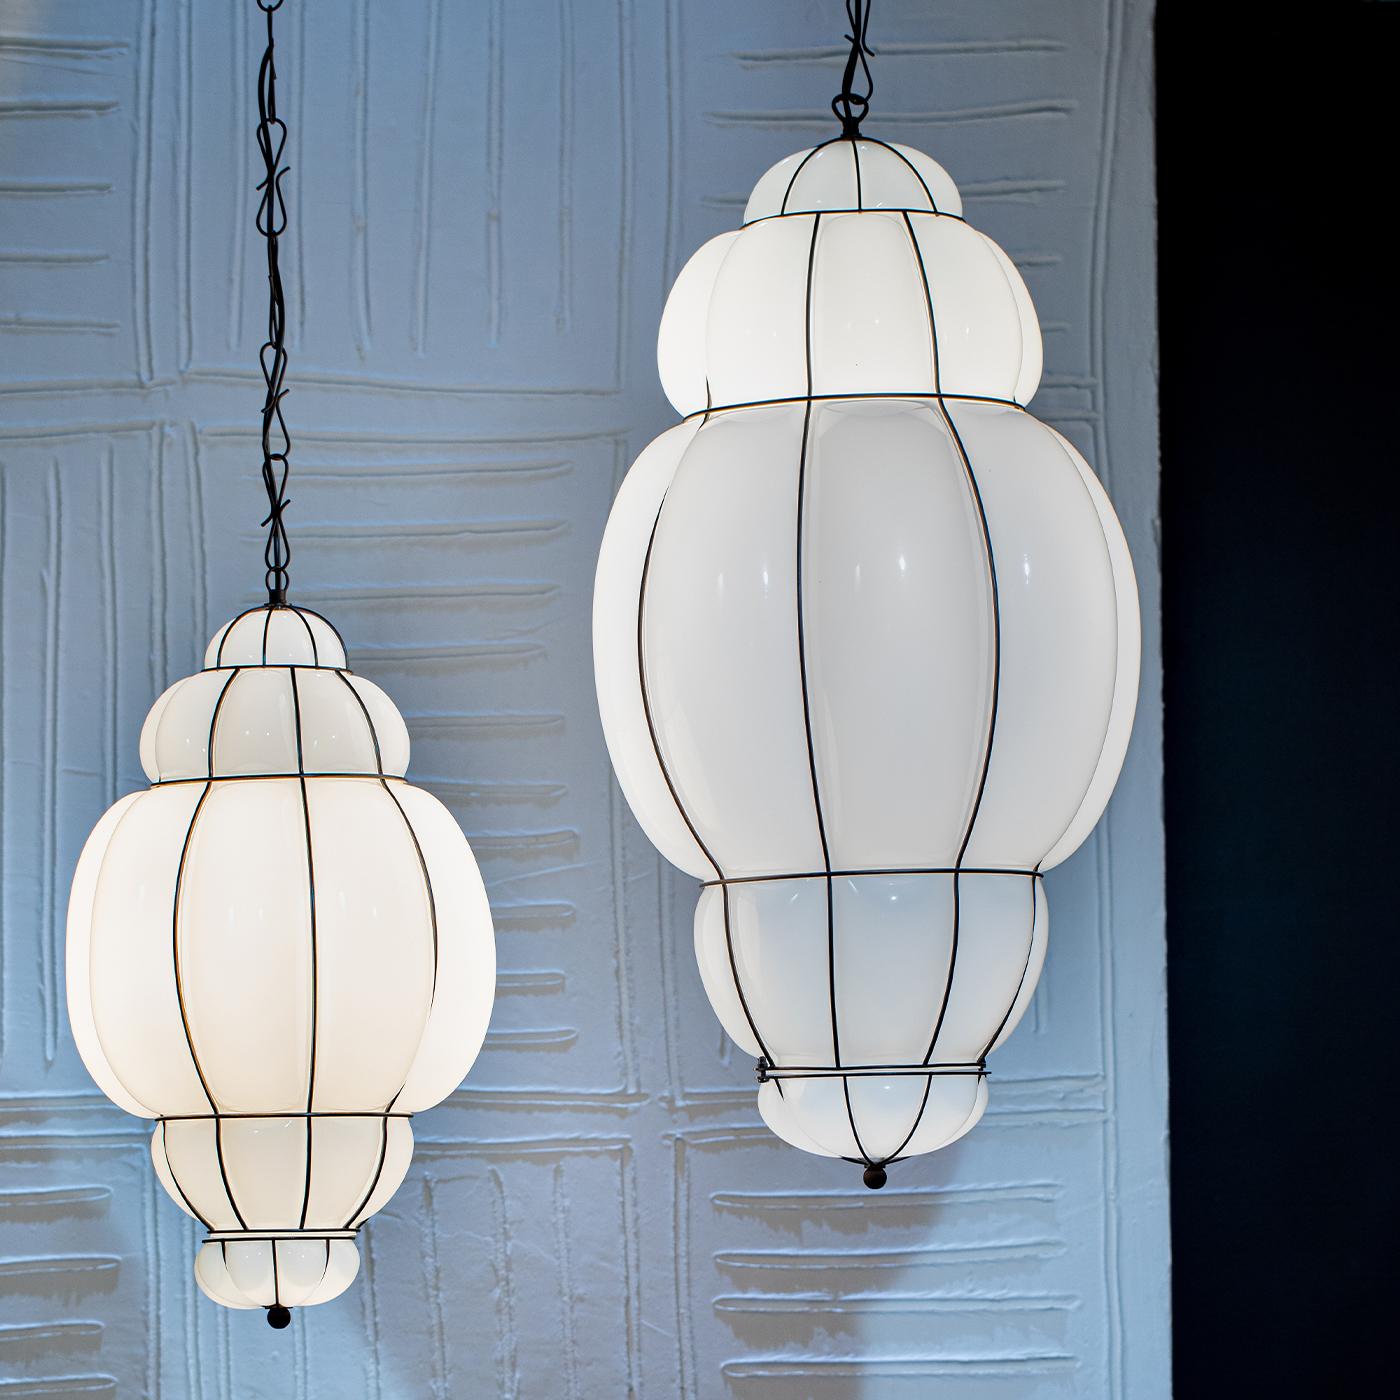 A showcase of glassblowing artistry rendered in a sophisticated modern evolution, this pendant lamp makes for a classy addition to modern entryways or bedrooms. The white Murano glass shade gets blown into a sleek stainless steel cage, from whose